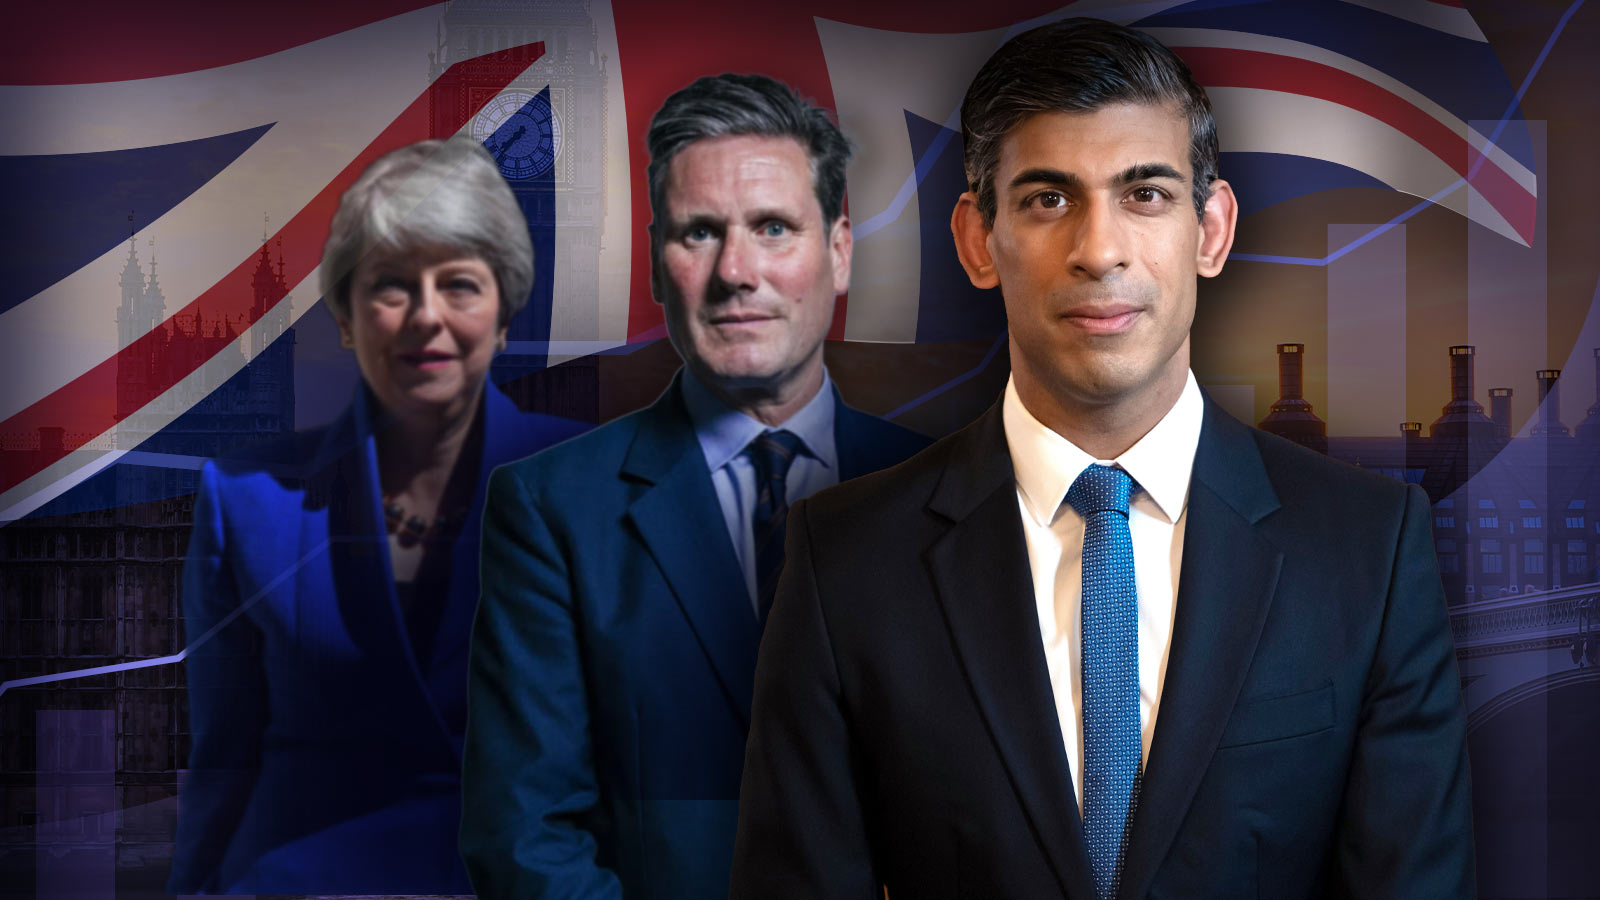 The Most Attractive UK Prime Minister Revealed: Rishi Sunak Tops the List